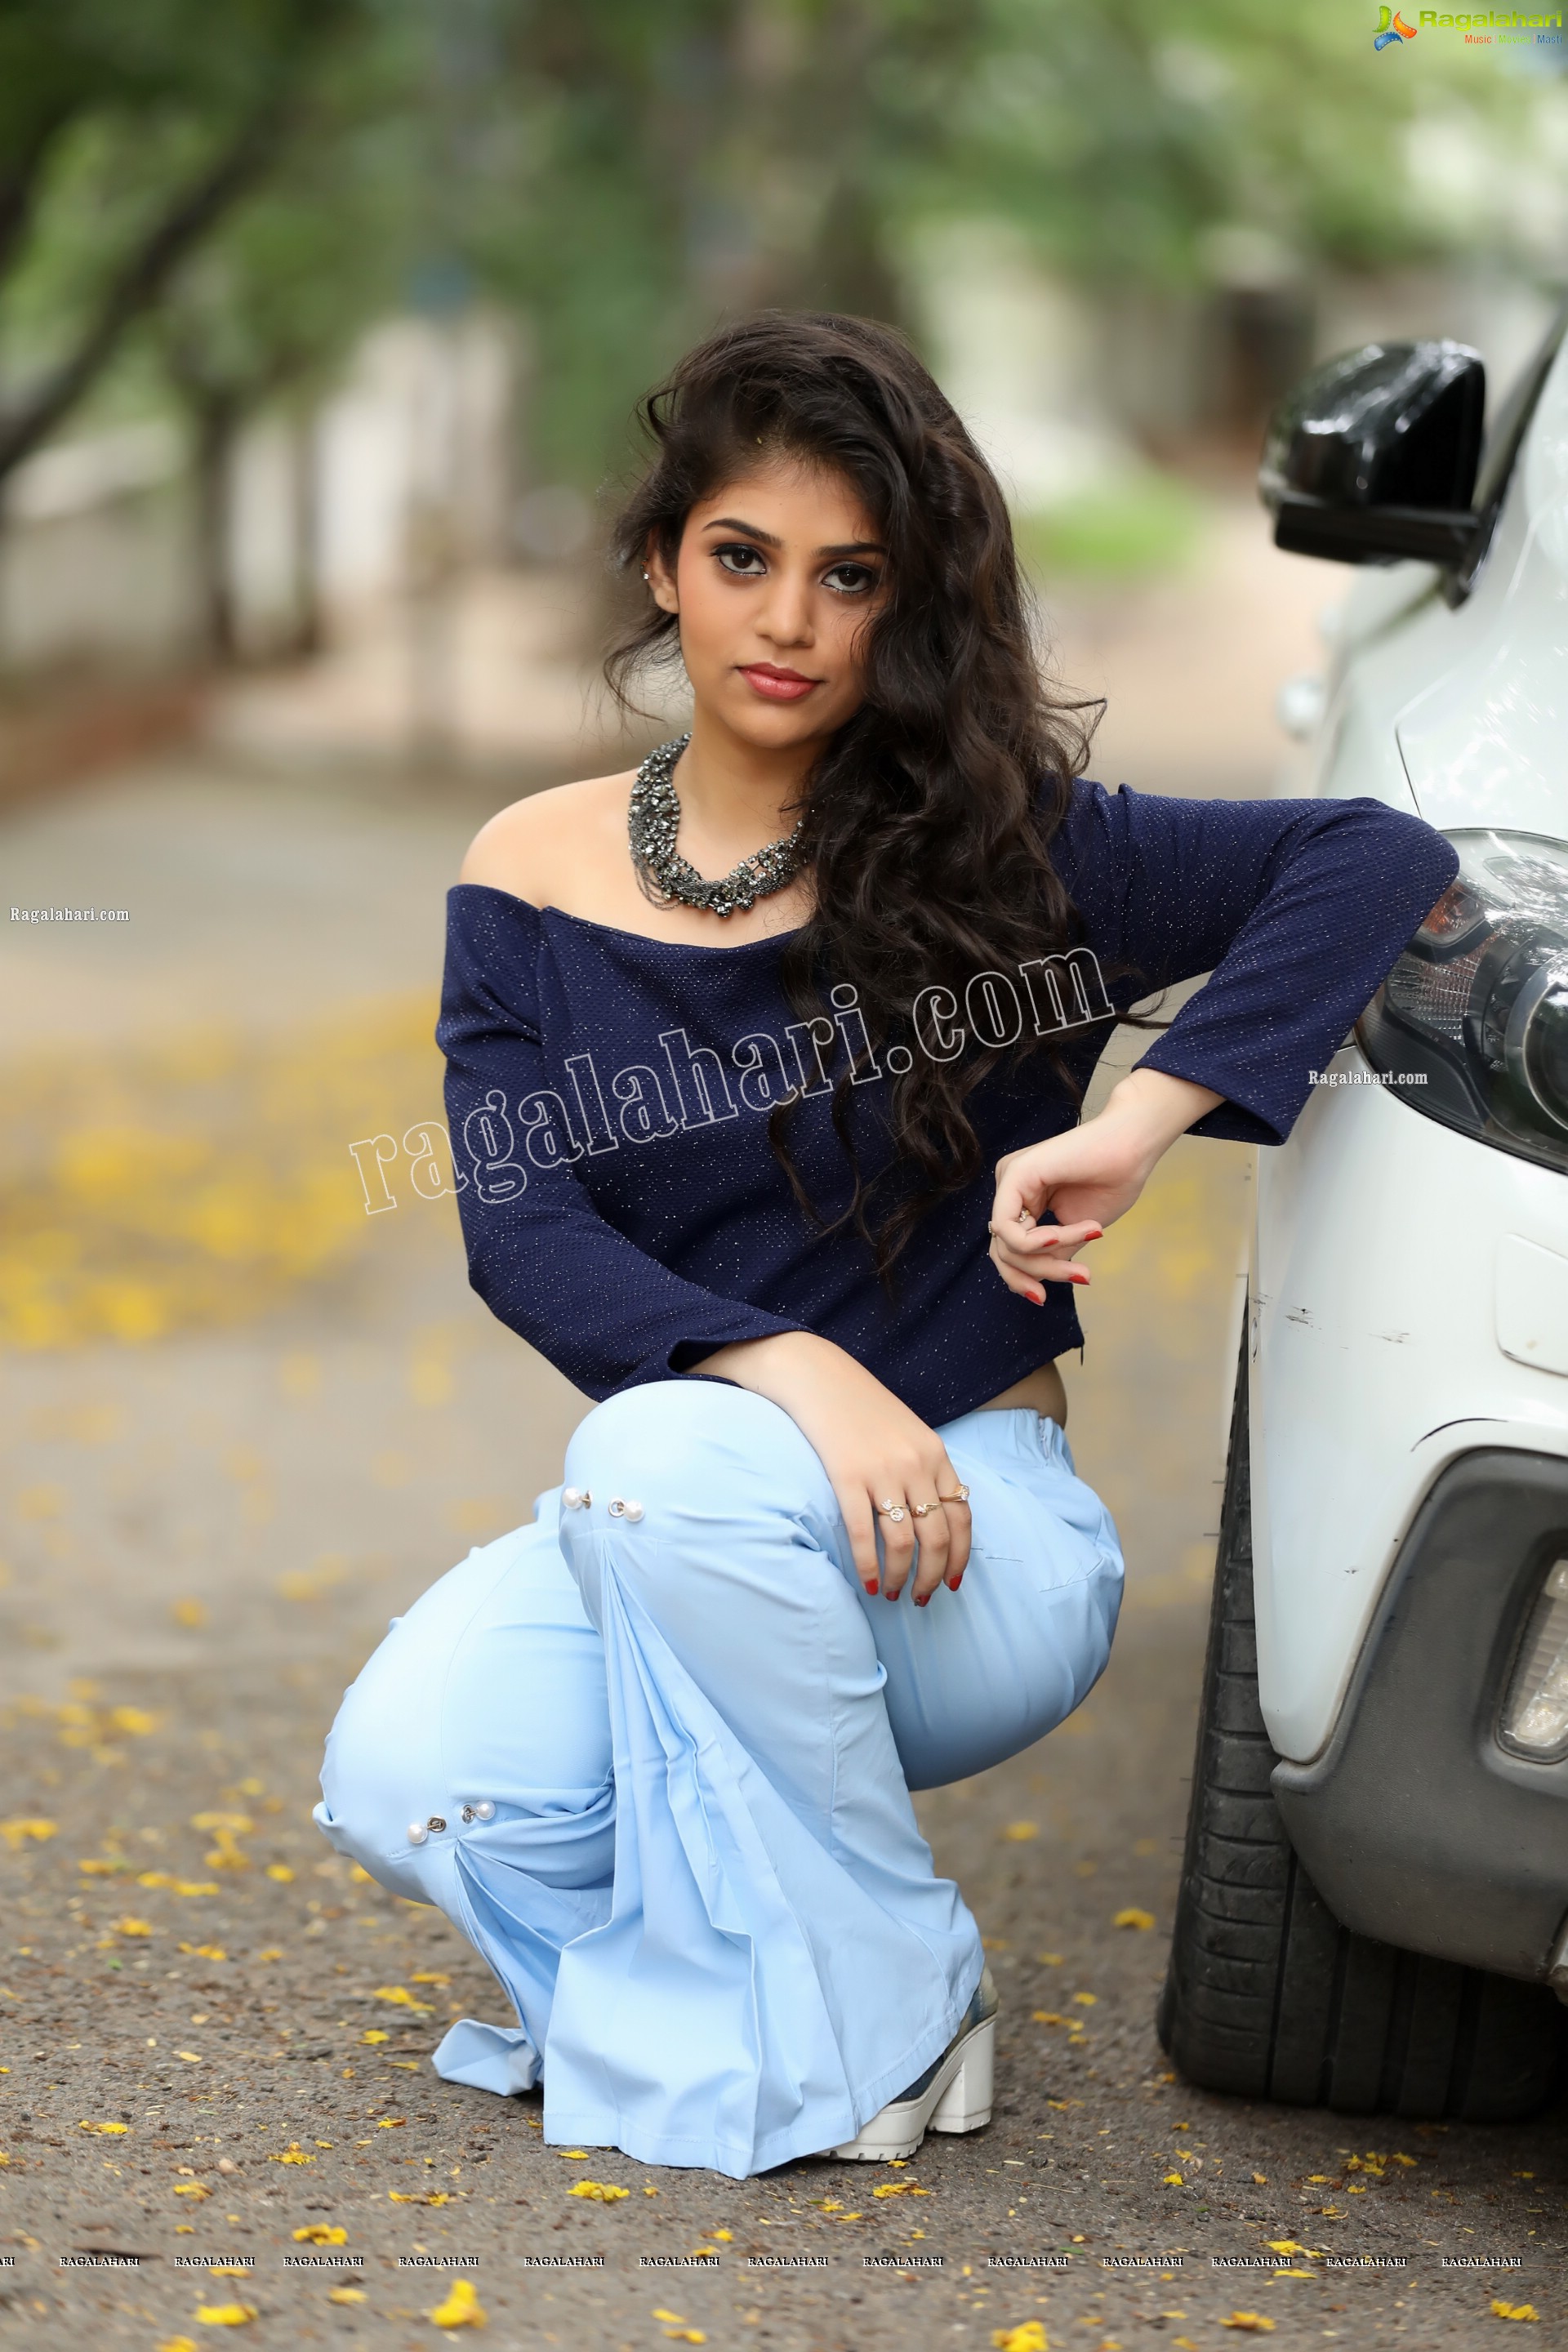 Viswa Sri Bandhavi in Off Shoulder Top and Flare Bell Bottom Pants Exclusive Photo Shoot